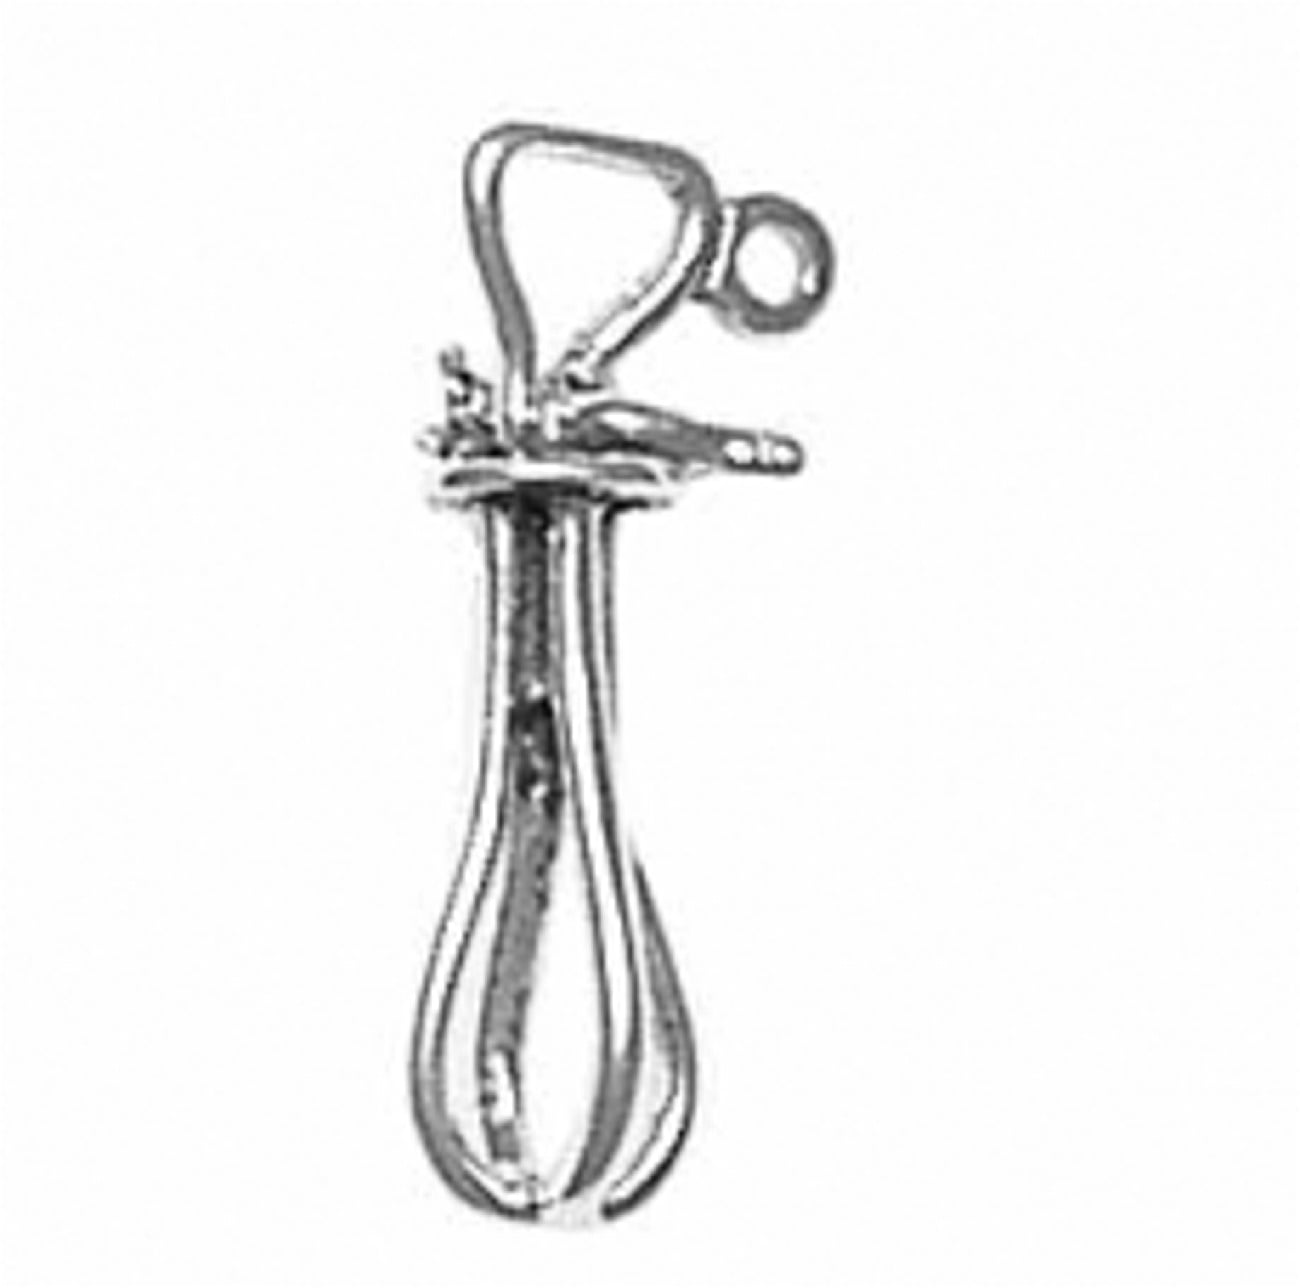 Sterling Silver Girls .8mm Box Chain Chefs Cooks Flat 5 Pound lb Bag Of Flour Pendant Necklace 